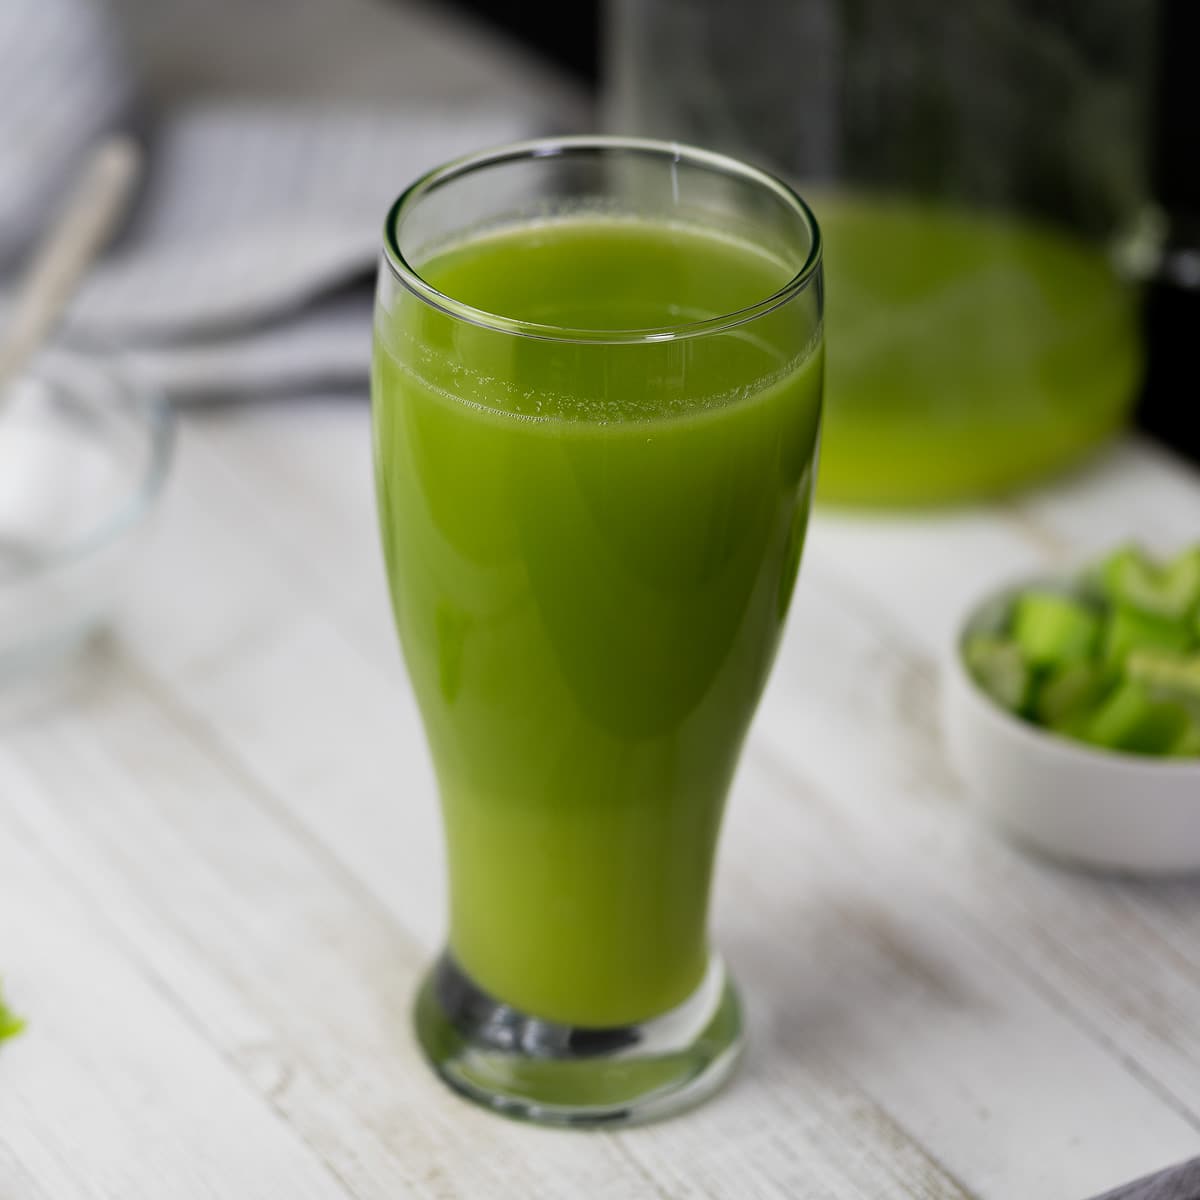 7 Best Healthy Green Drinks Recipes (Non-alcoholic)